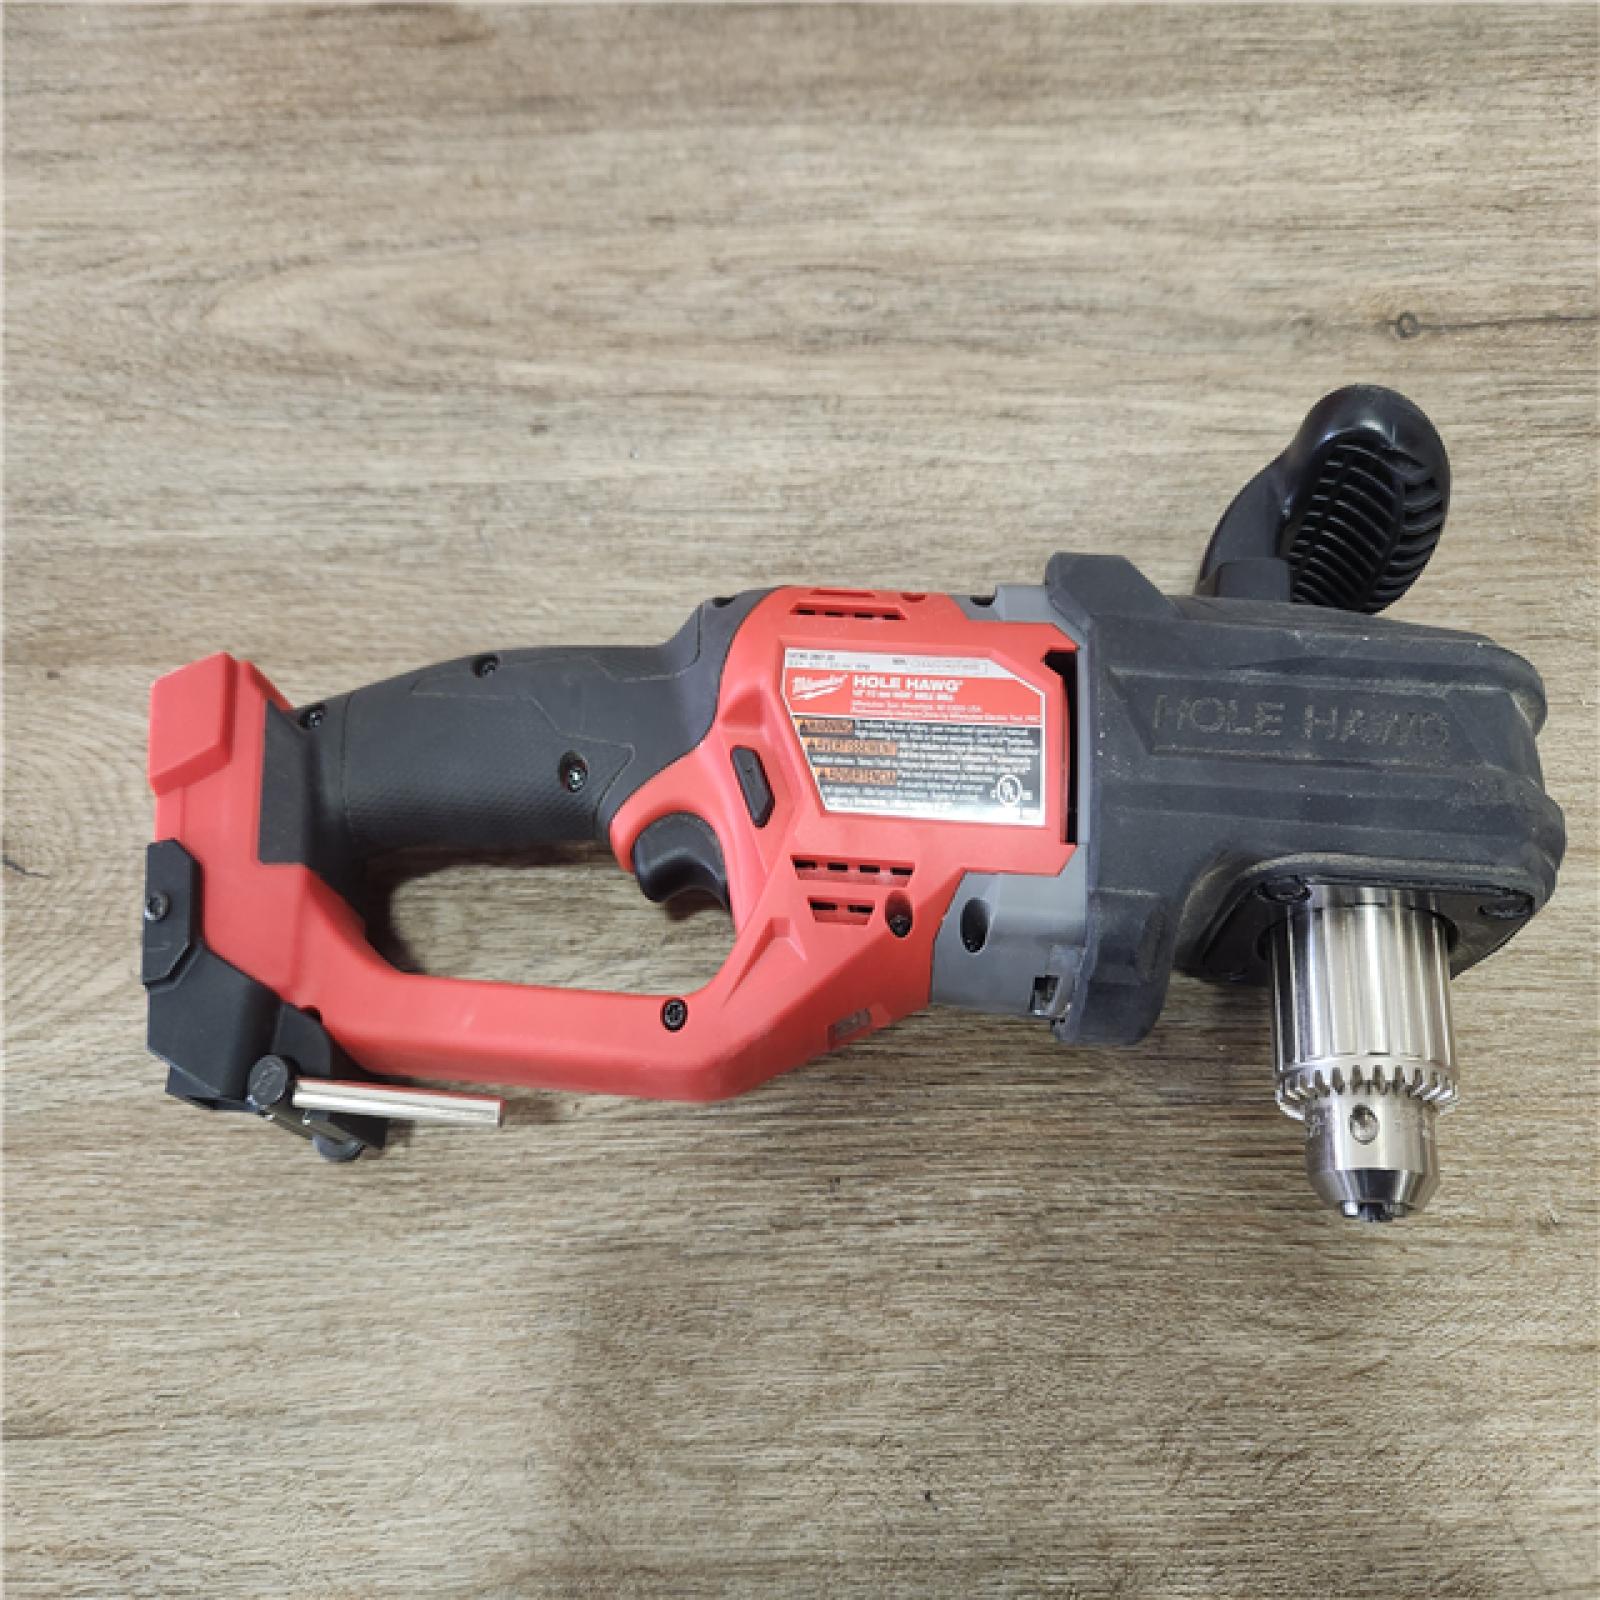 Phoenix Location NEW Milwaukee M18 FUEL GEN II 18V Lithium-Ion Brushless Cordless 1/2 in. Hole Hawg Right Angle Drill (Tool-Only)